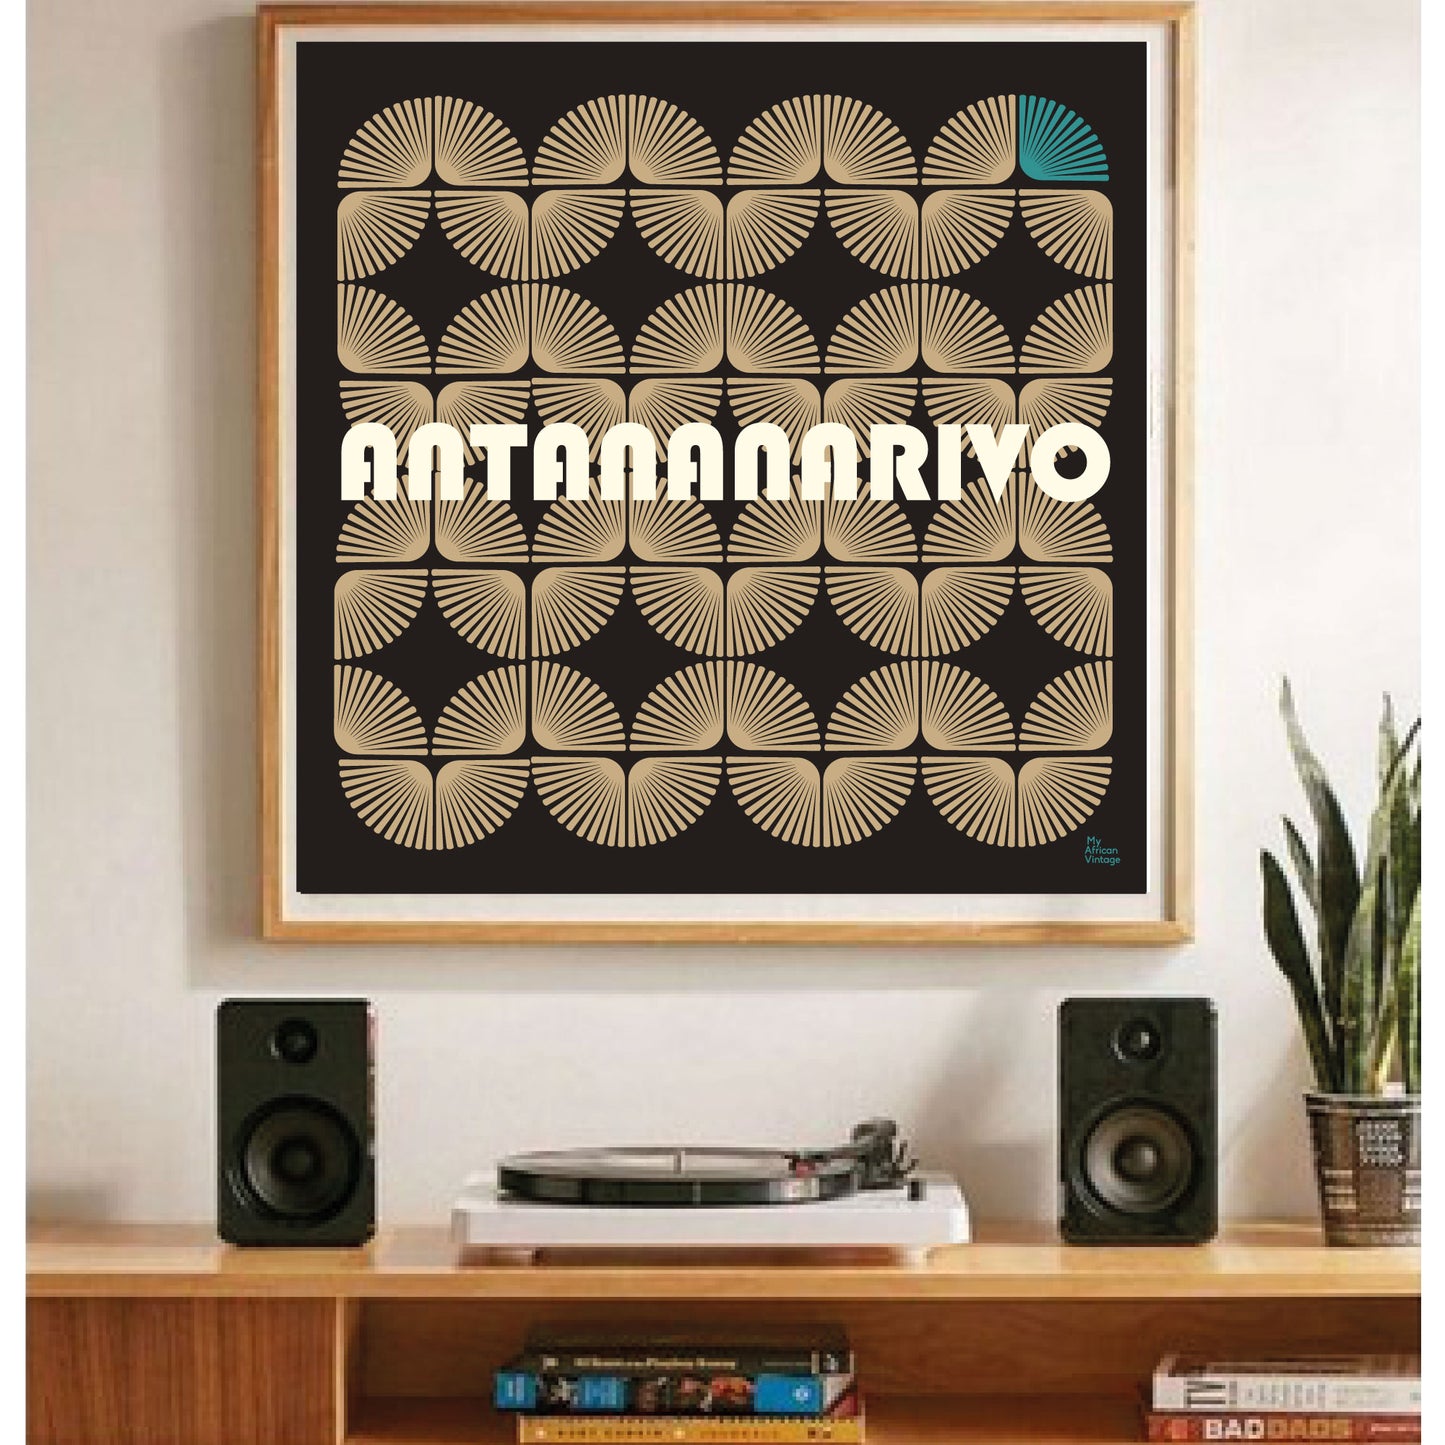 "Antananarivo" retro style poster  - "My African Vintage" collection